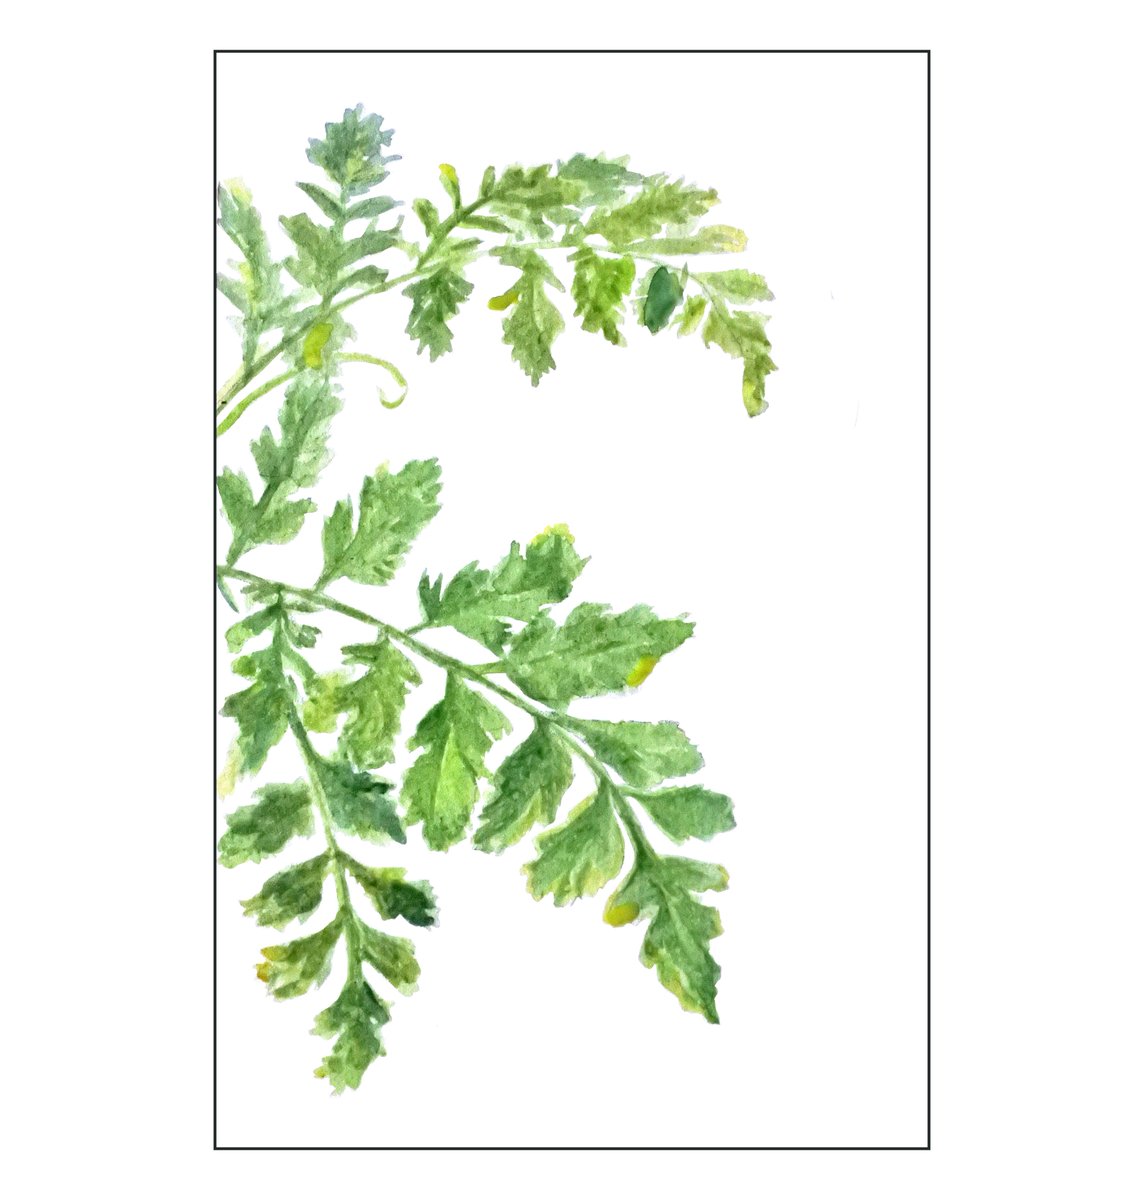 54/100 of #apaintingaday 
Today was a VERY happy day 🌞 🌞
#watercolor #painting #art #fern #artoftheday #paintingplants #creativebusiness #friend #100daysofart #